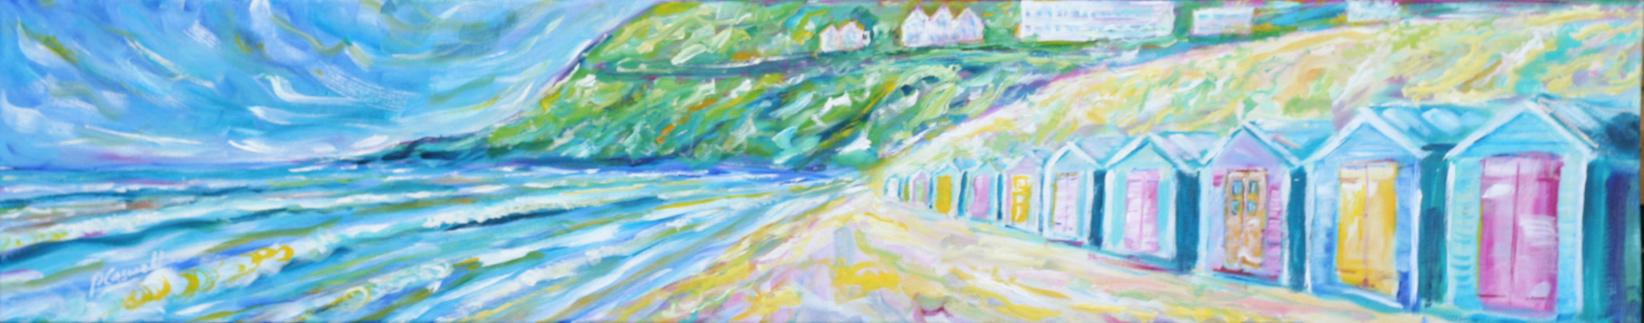 Beach Huts at Saunton Sands Painting For Sale